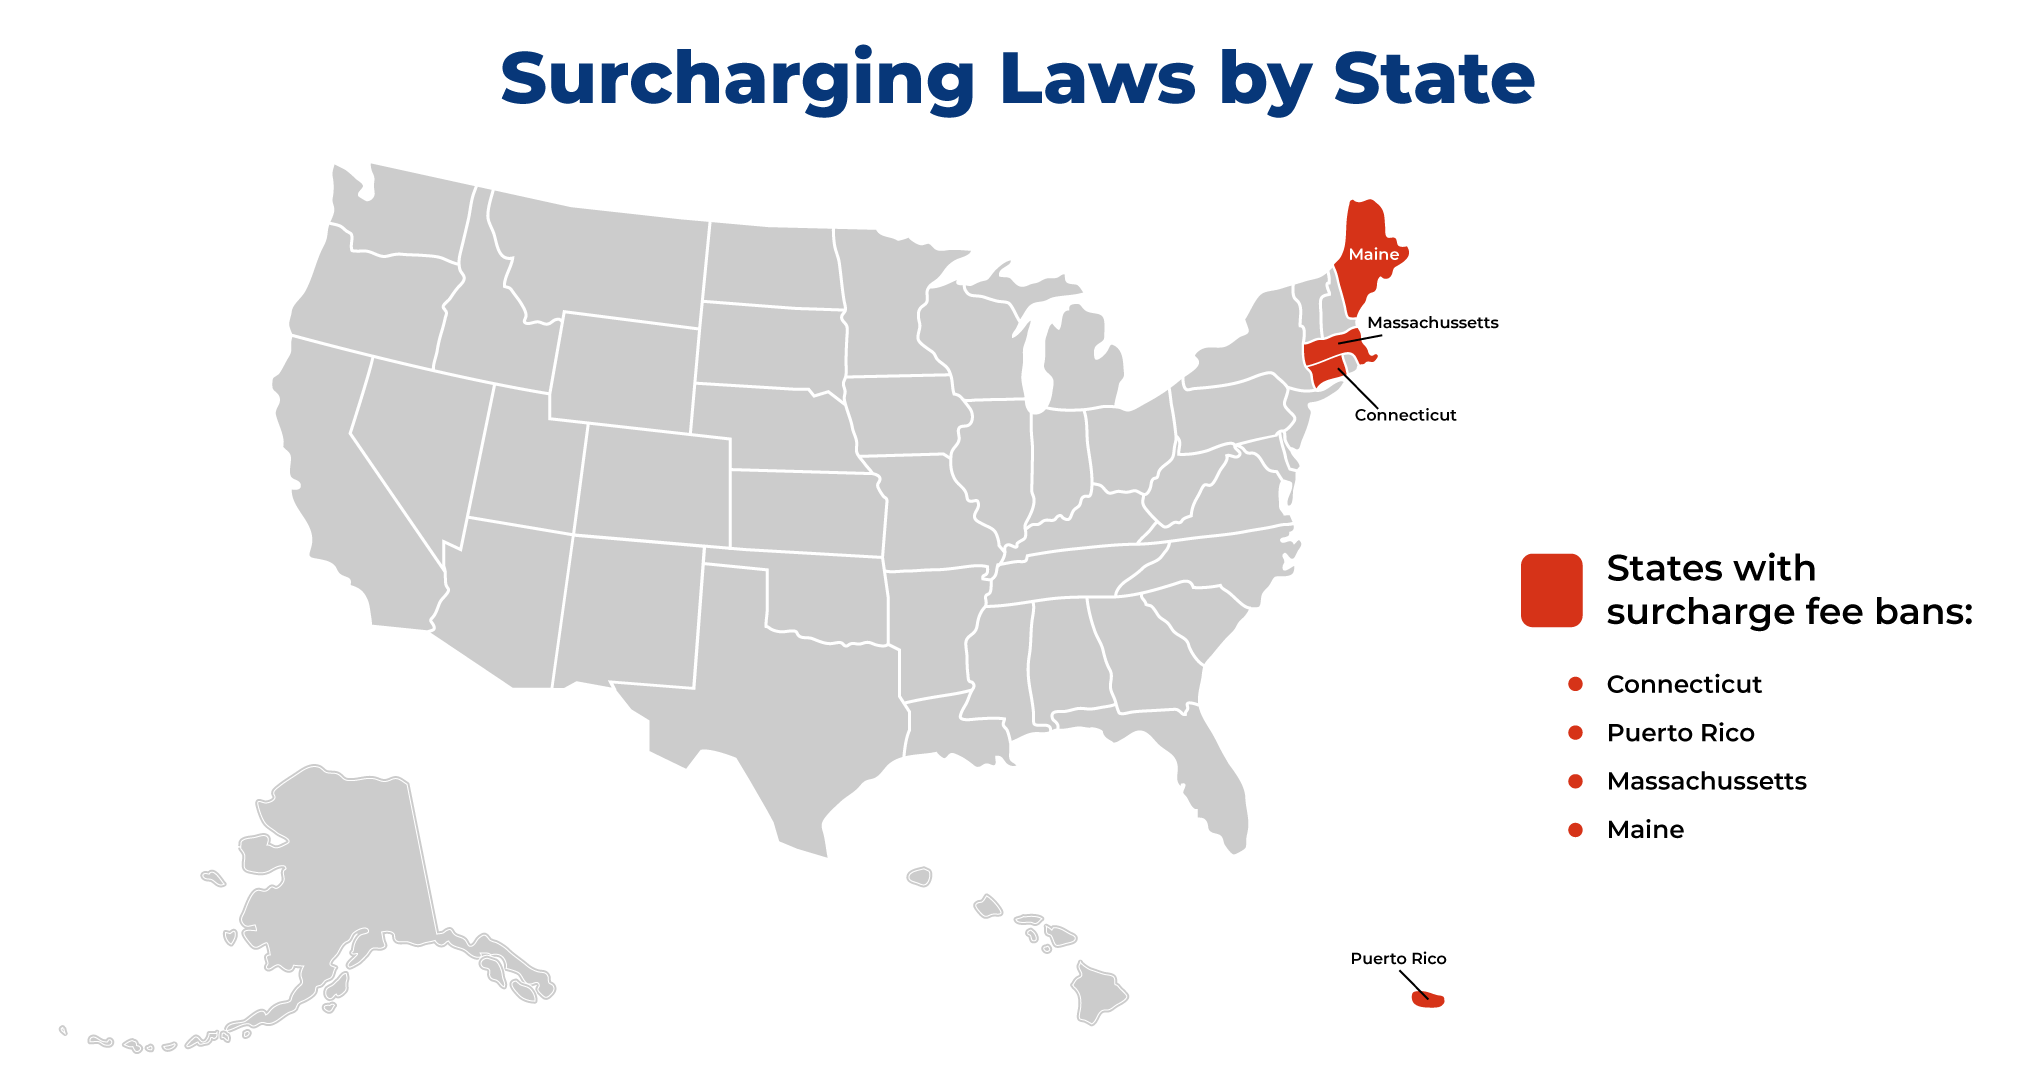 Surcharging Laws by State